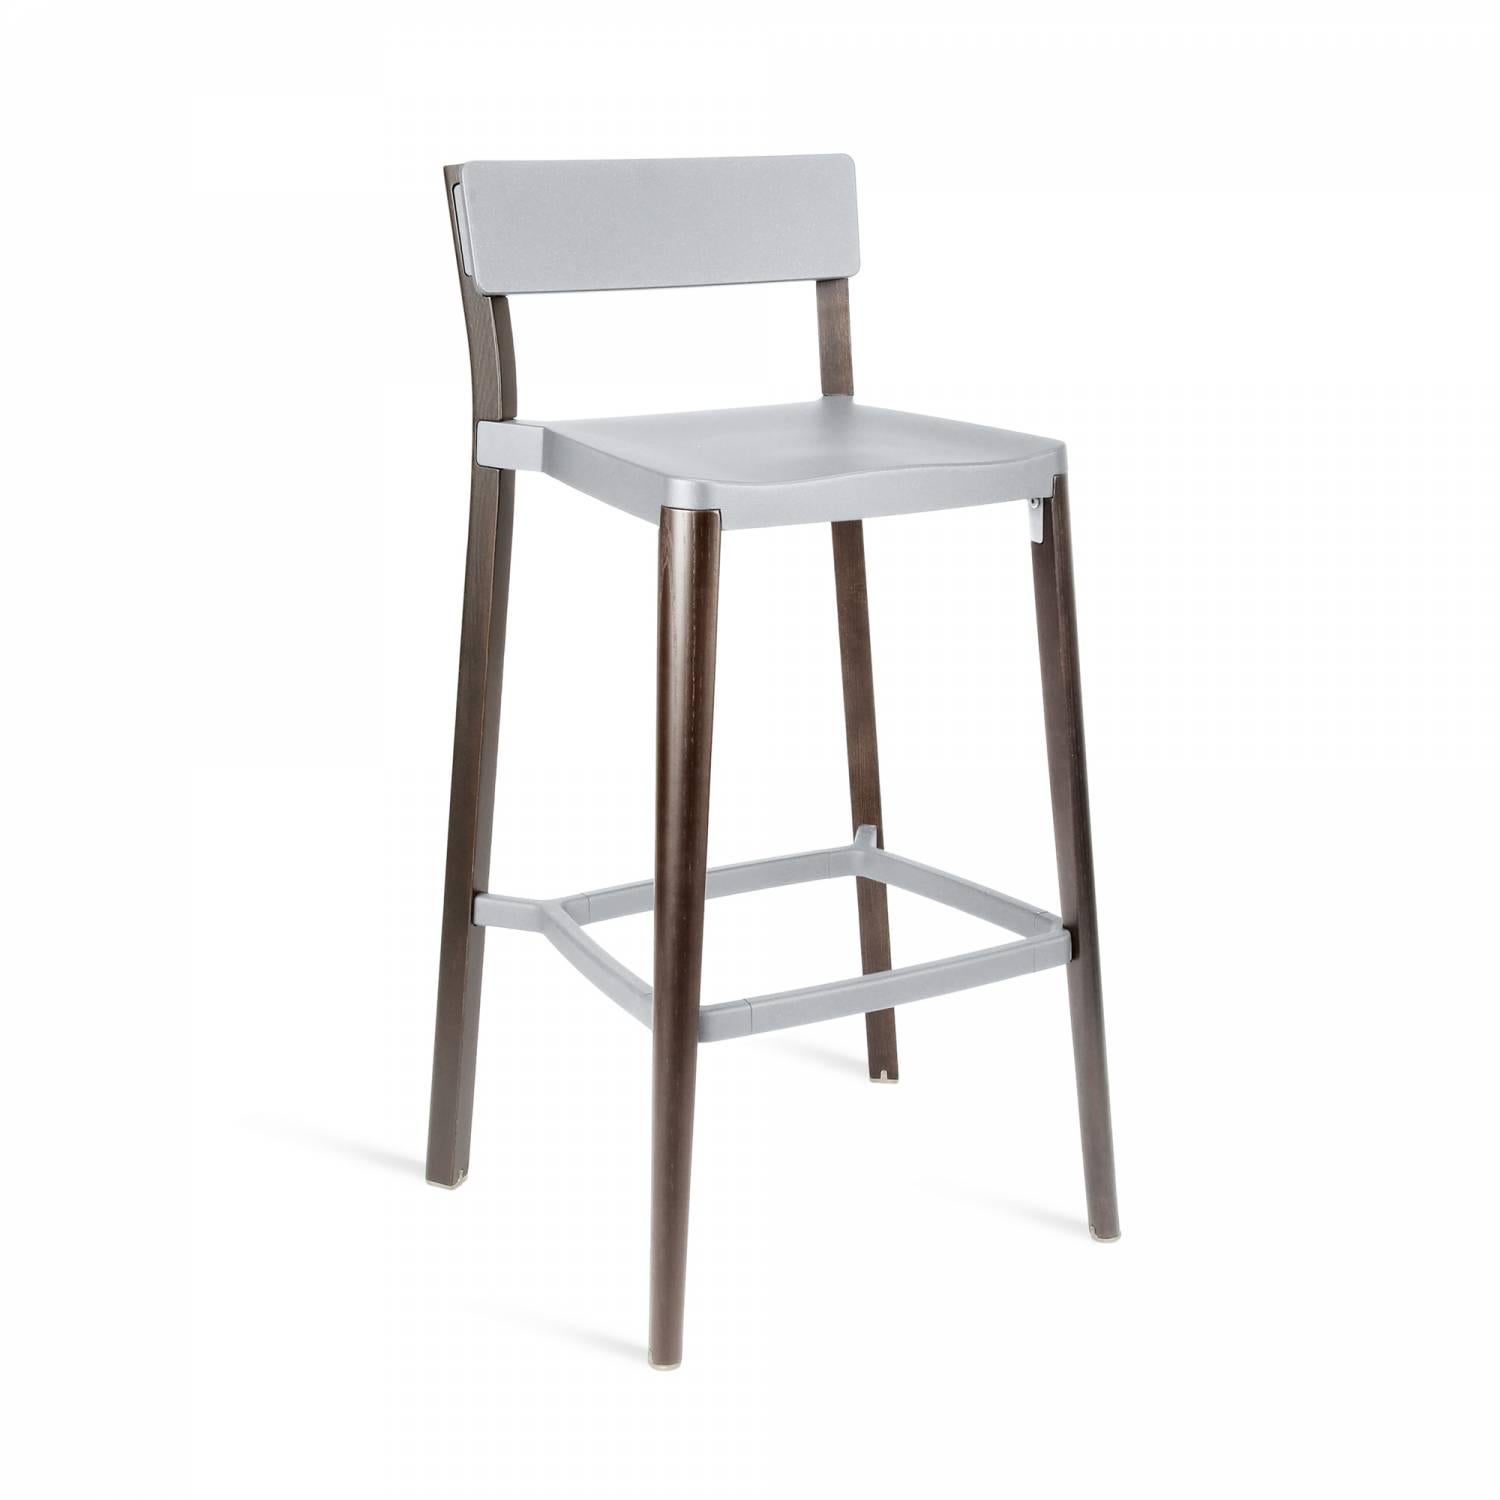 Our clients have asked us to utilize wood in our designs for years. Lancaster features a re-claimed, solid ash frame and recycled die-cast aluminum seat and back- an expression of industrial technique and warm materials.

Made of: Recycled